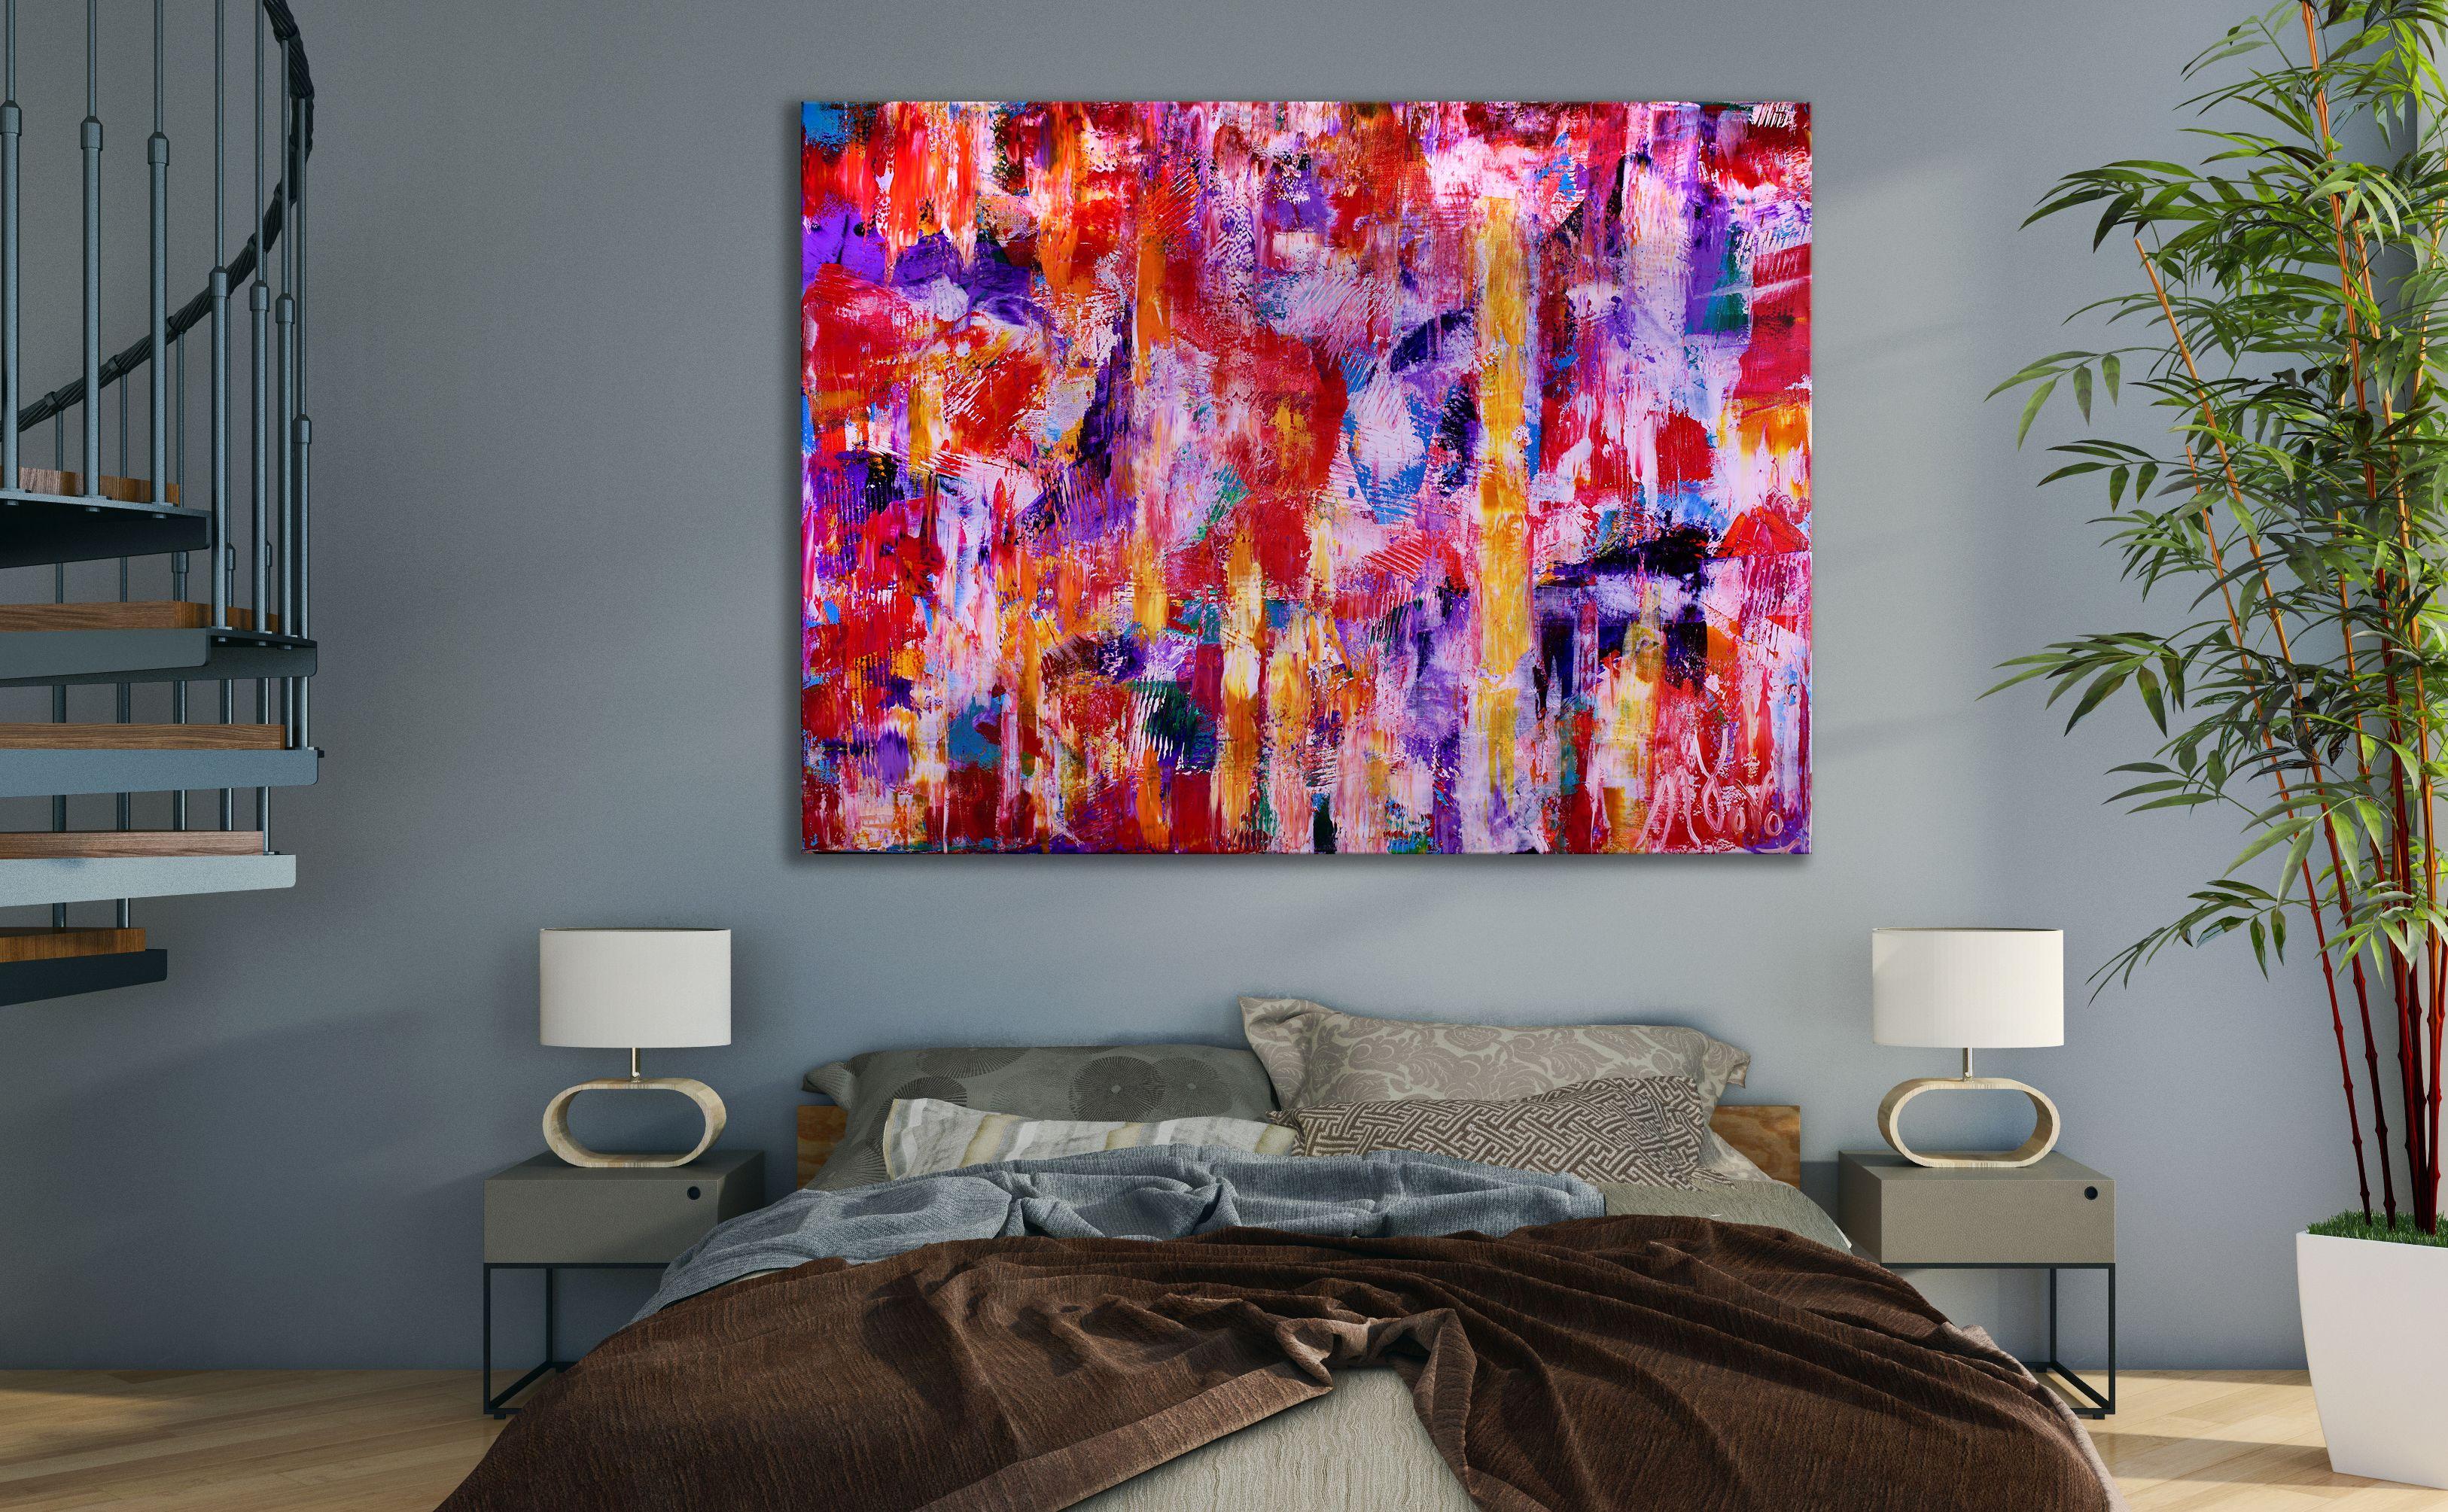 Very vibrant and bold colorfield painting with great light and organic details. Textured with many layers of gesso to prime the canvas then applied acrylic paint with spatulas and palate knifes creating very organic textures and forms. Mainly red